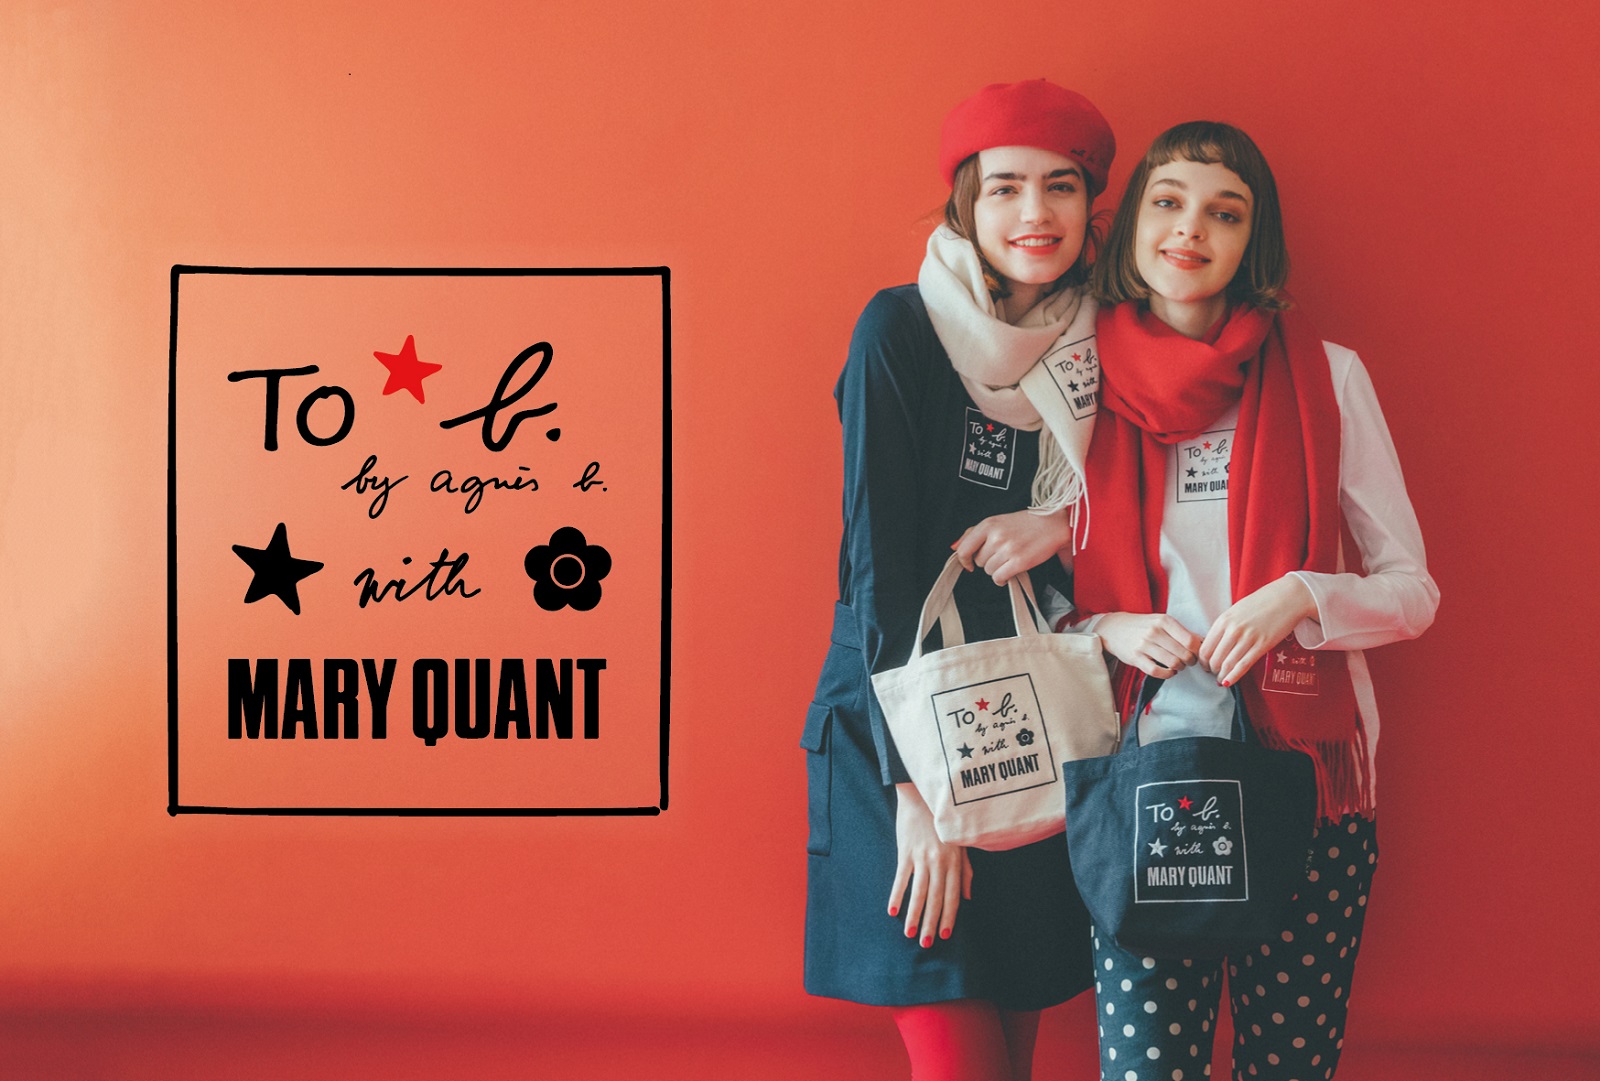 To B By Agnes B Mary Quant 初のコラボレーションアイテムが登場